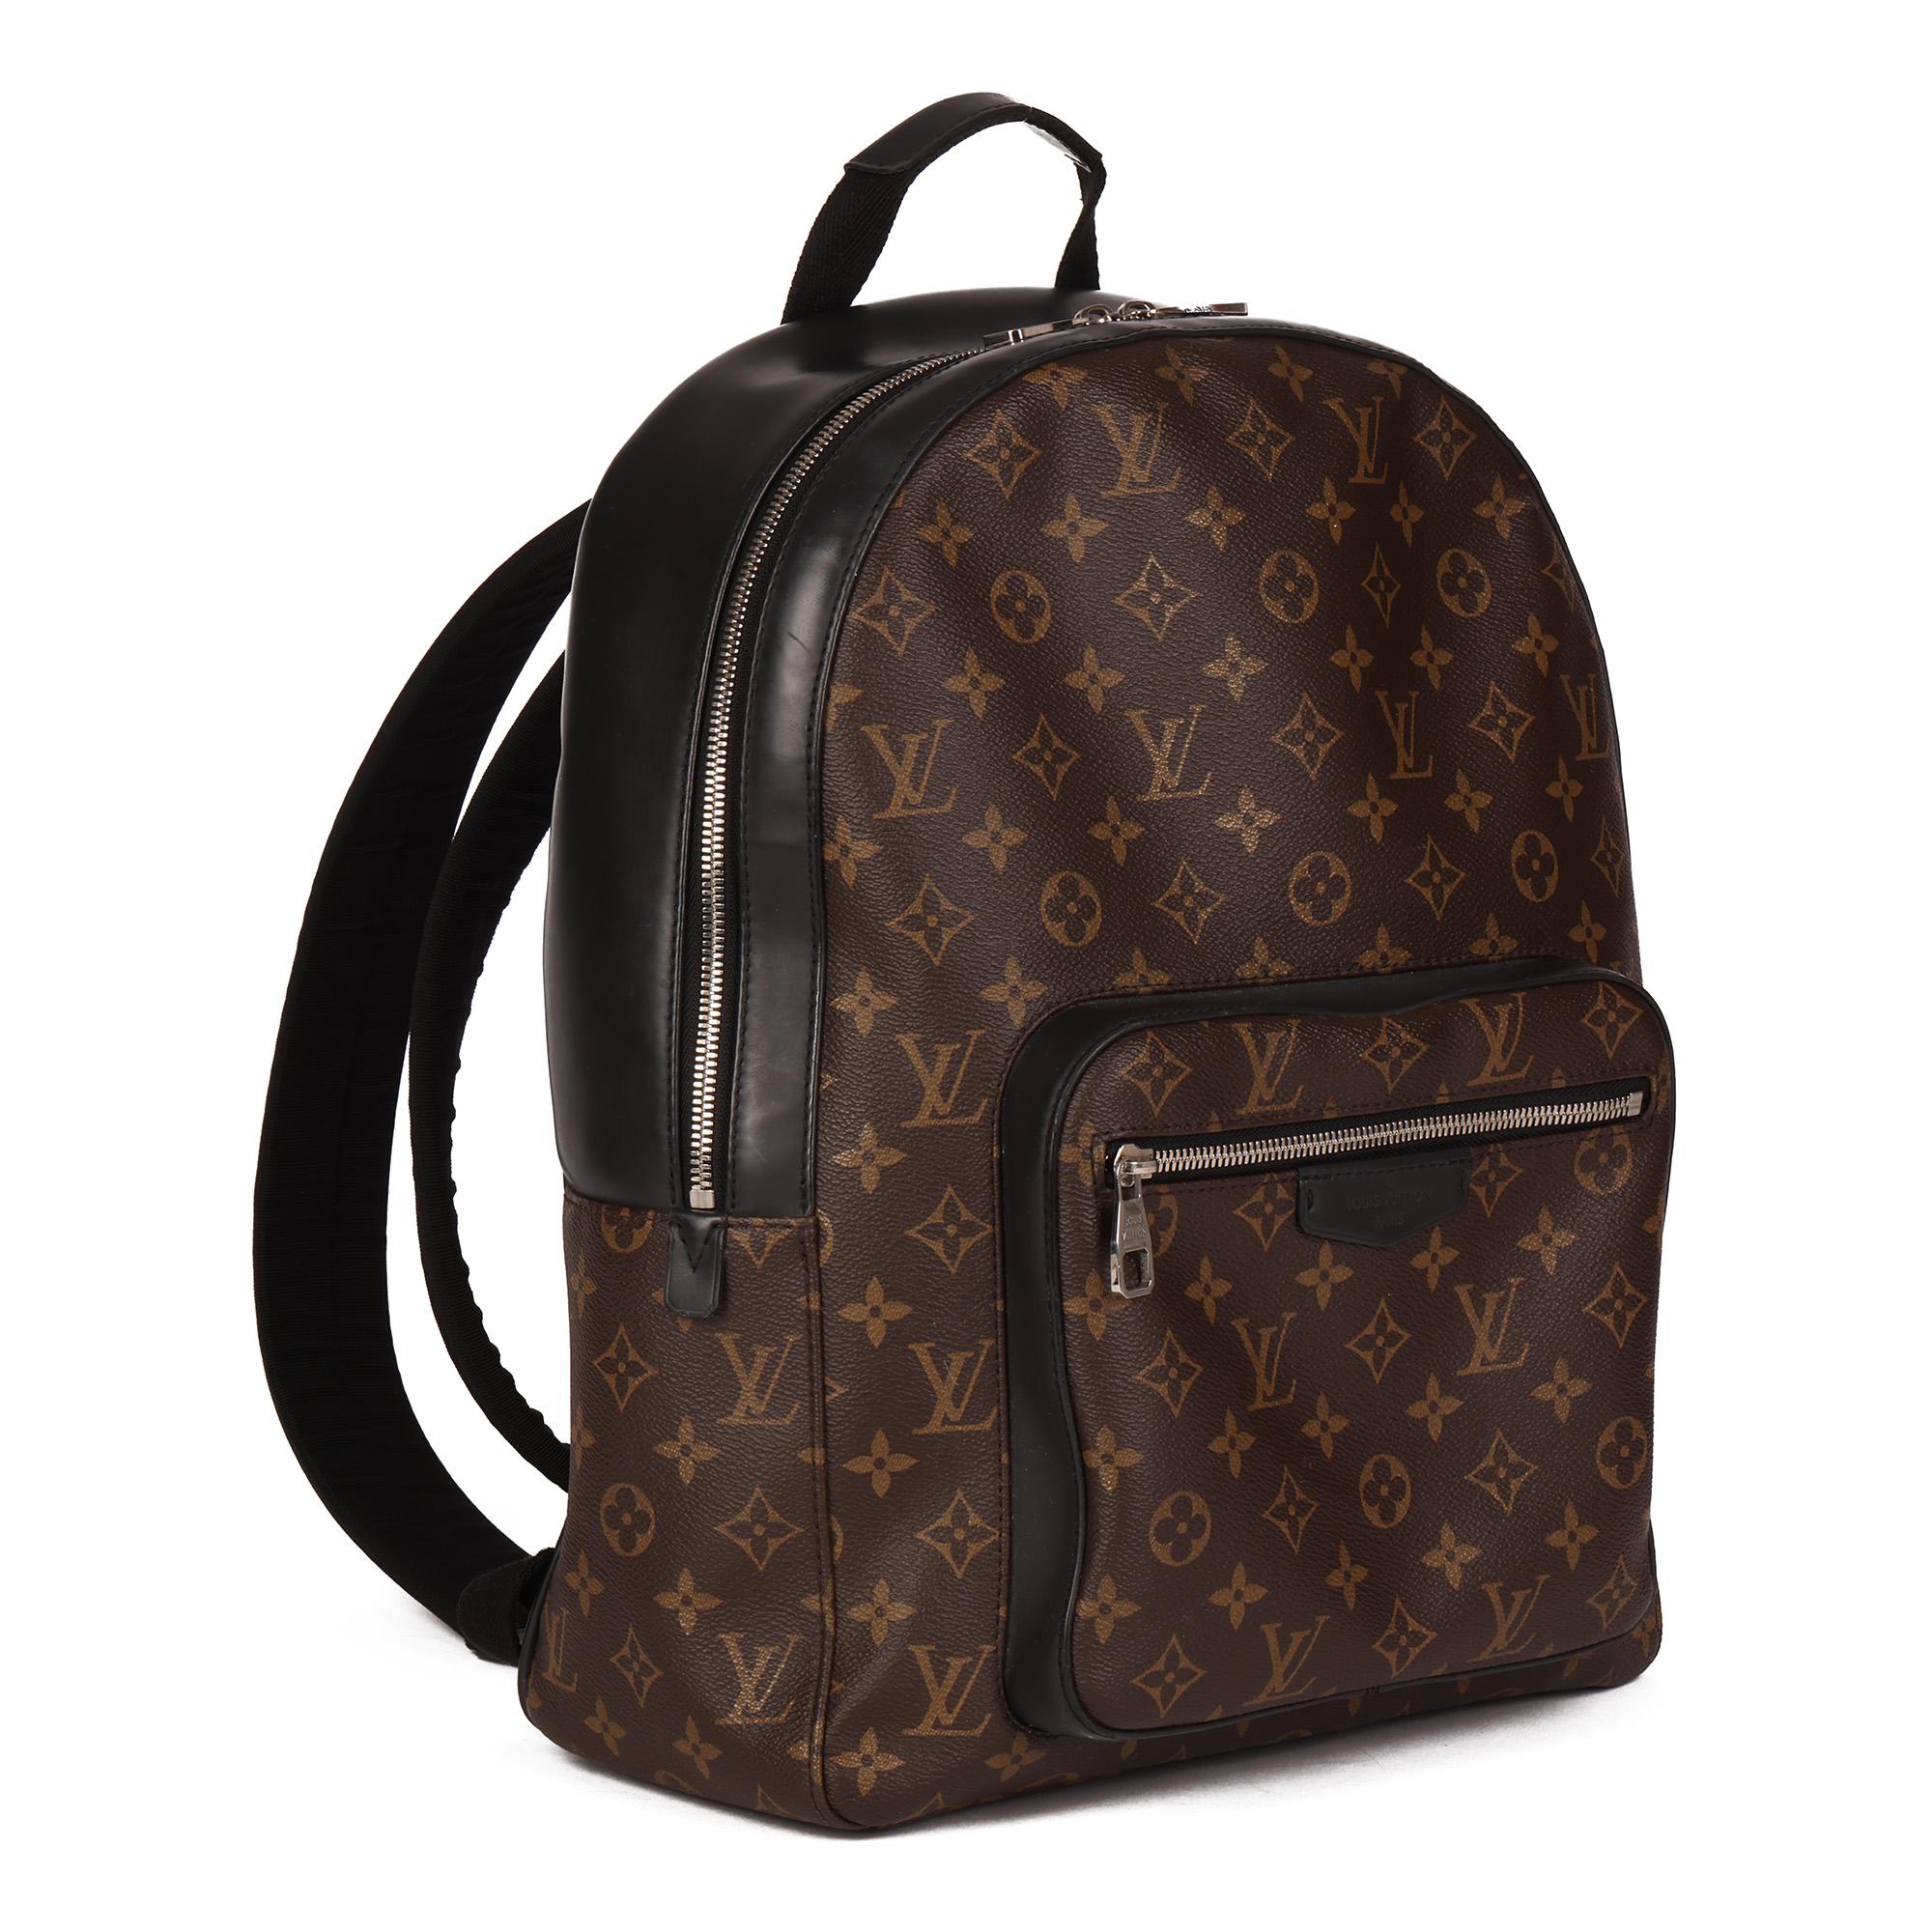 LOUIS VUITTON
Brown Monogram Coated Canvas & Black Calfskin Leather Josh Backpack

Xupes Reference: CB537
Serial Number: TJ4166
Age (Circa): 2016
Authenticity Details: Date Stamp (Made in France)
Gender: Ladies
Type: Top Handle, Backpack,